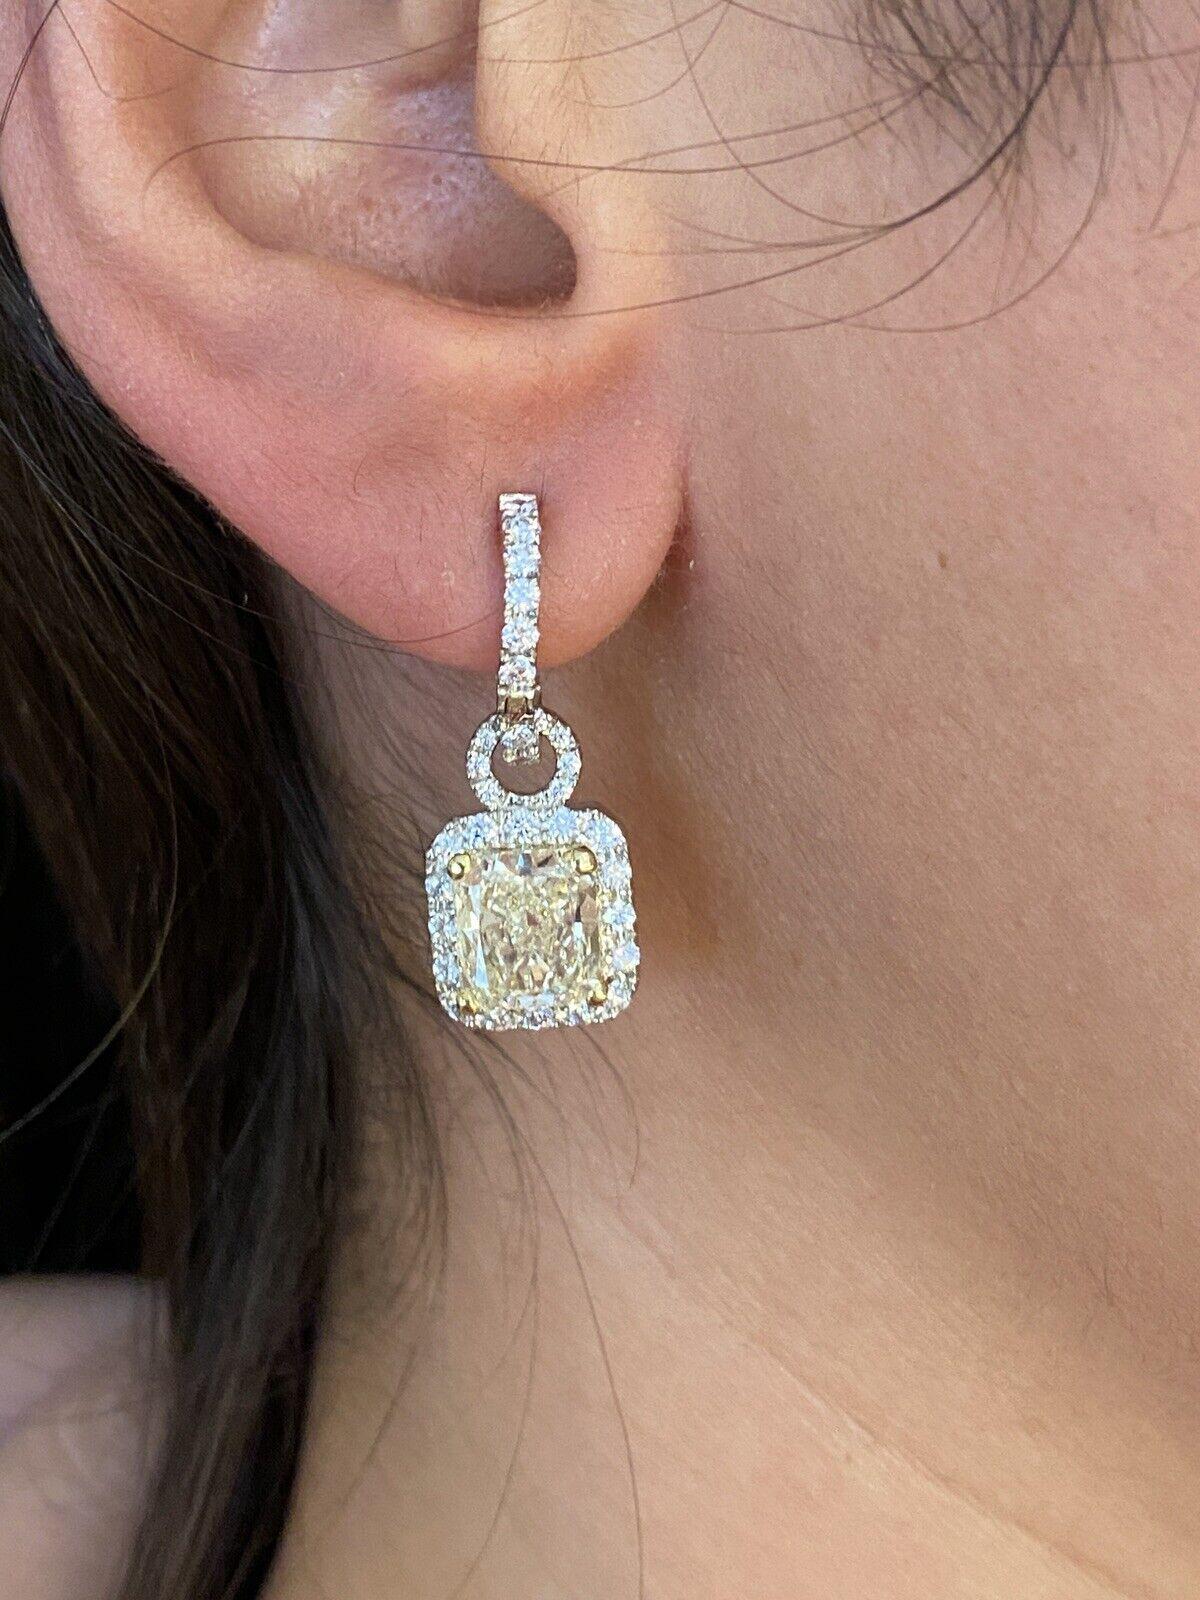 GIA Certified 2.23 carats & 2.38 carats Radiant Cut Diamond Drop Earrings in 18K White & Yellow Gold

Diamond Drop Earrings feature 2 Radiant Cut Diamond centers accented by approximately 1.50 carats of Round Brilliant cut Diamonds set in in 18K